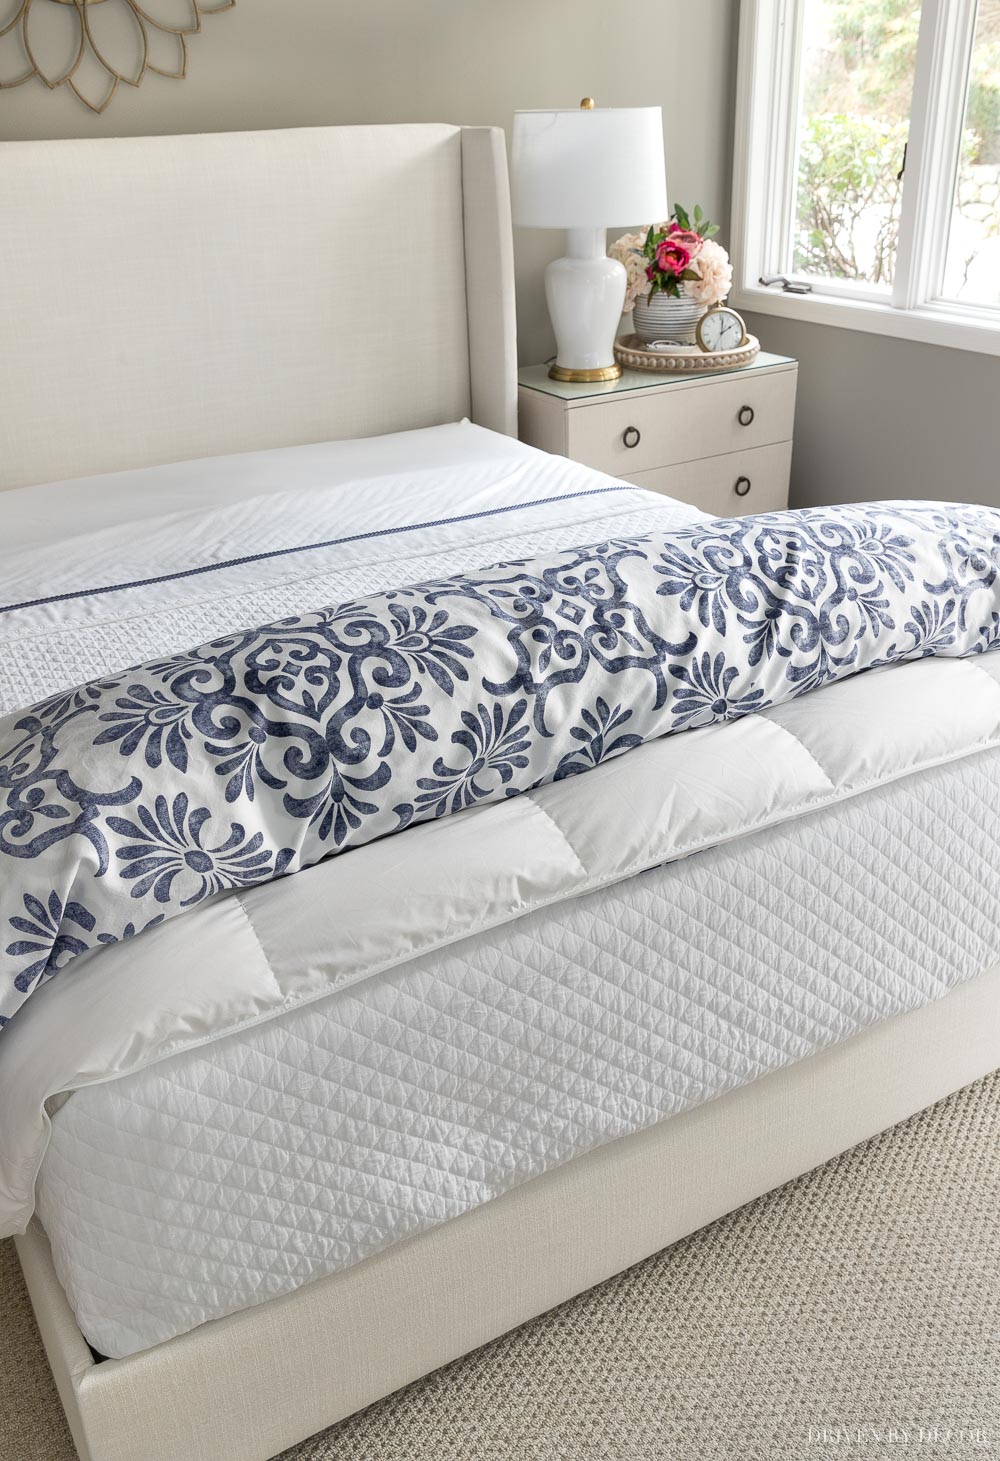 The simple way to put your duvet cover over your insert